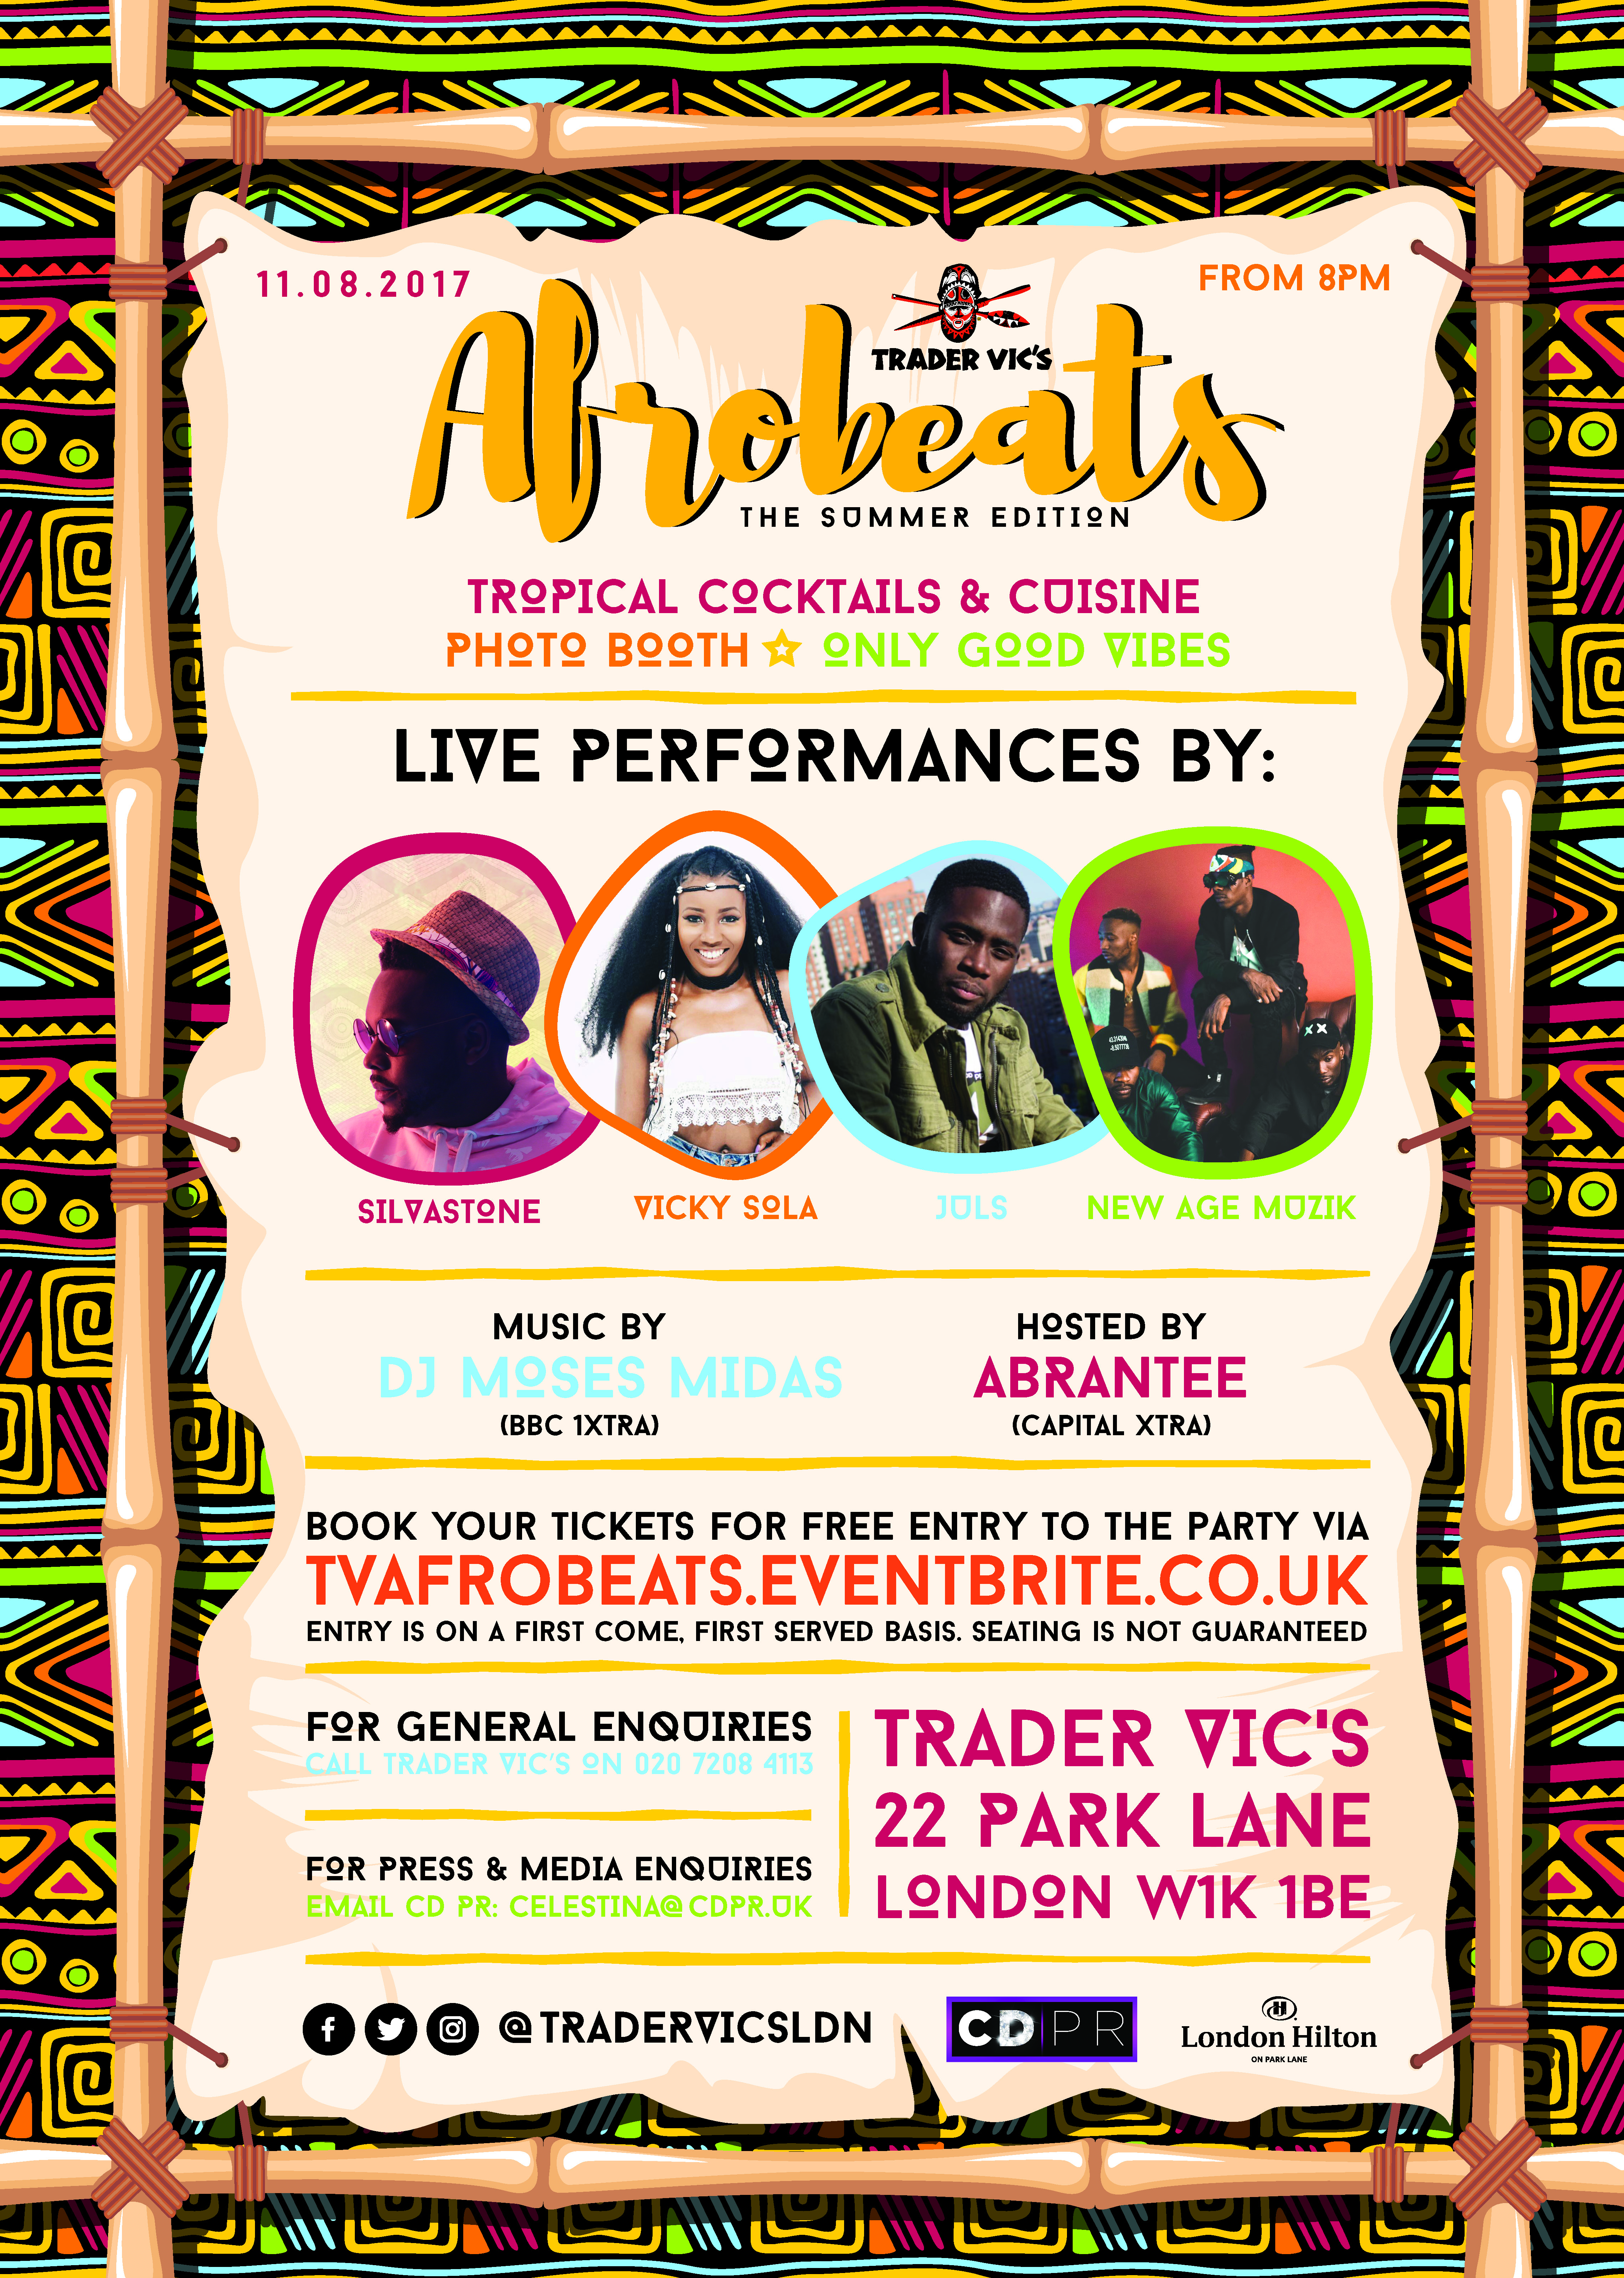 AFROBEATS COMES TO ICONIC CENTRAL LONDON VENUE